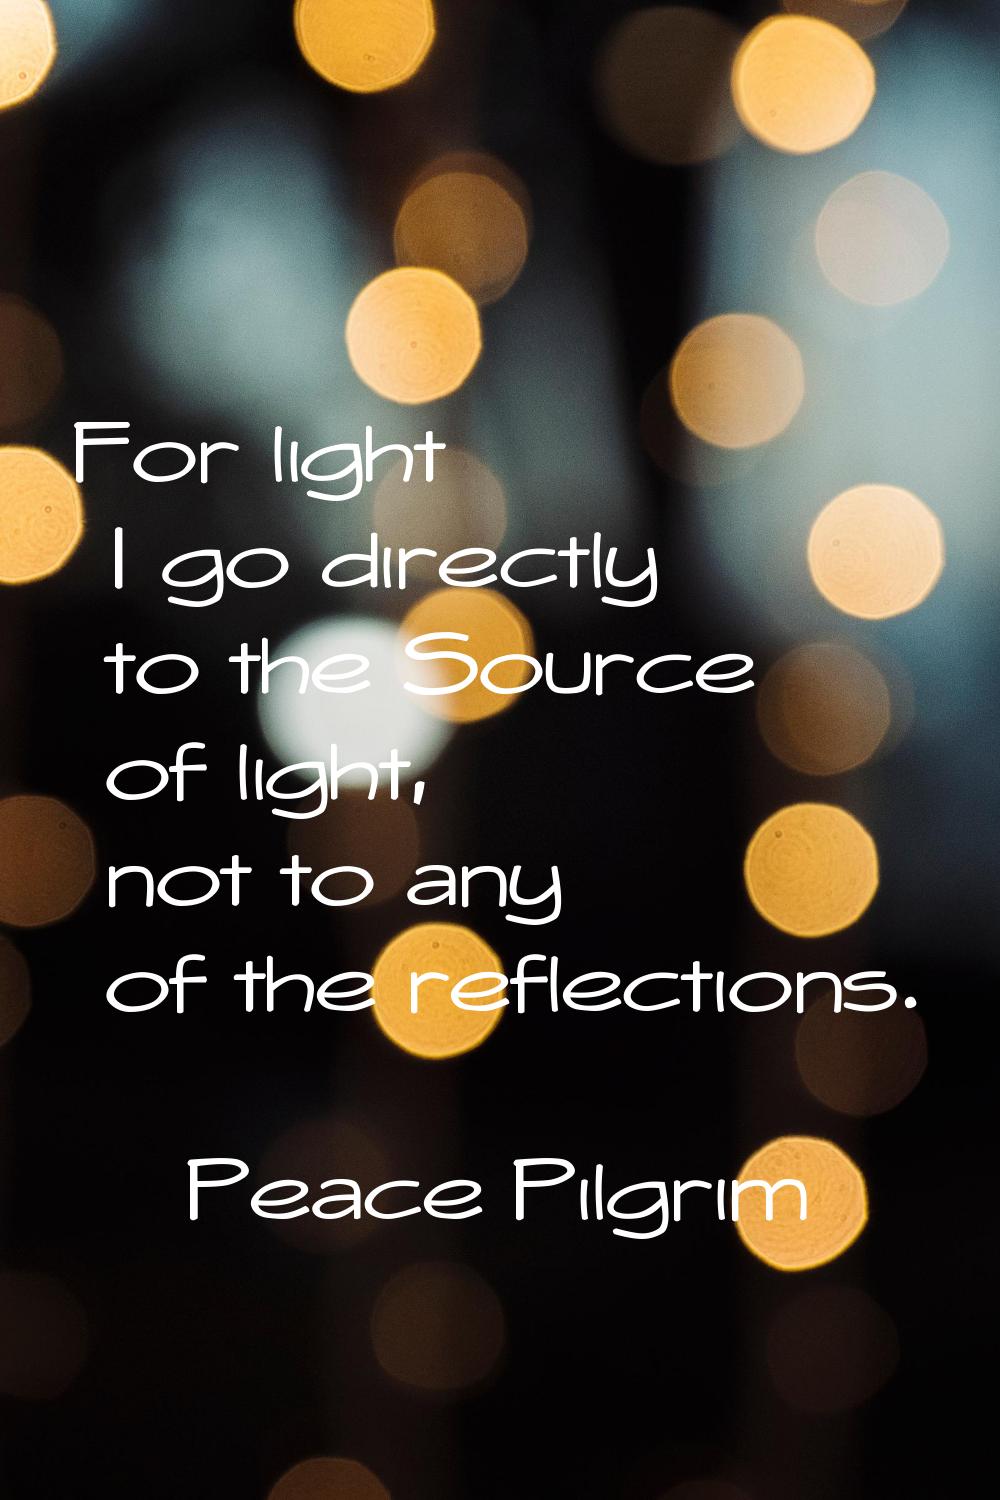 For light I go directly to the Source of light, not to any of the reflections.